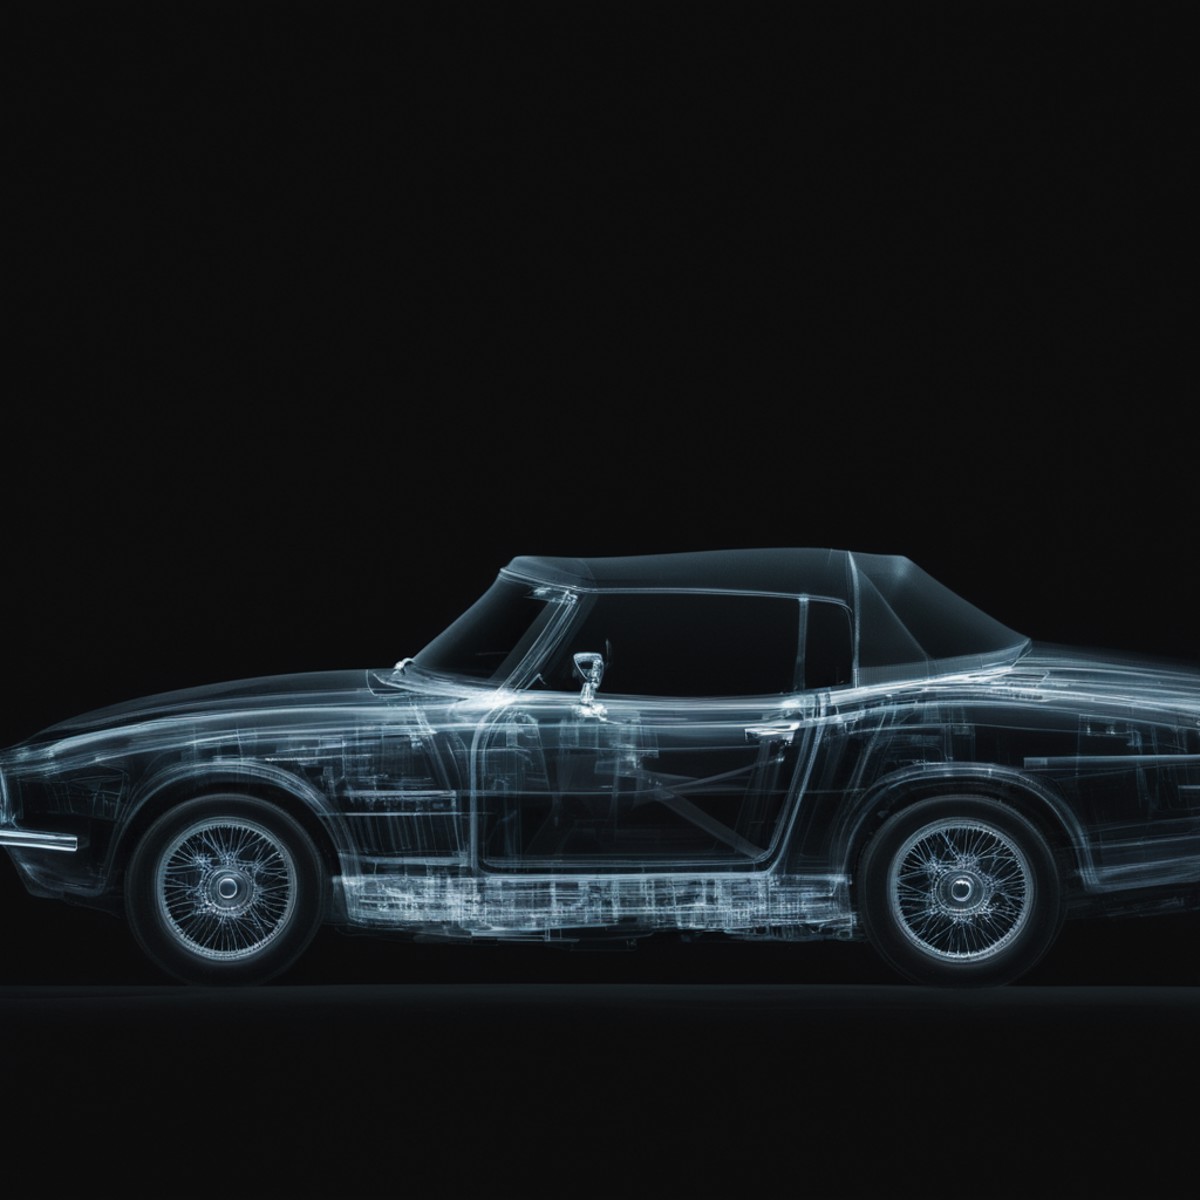 cinematic film still of  <lora:x-ray style:1> X-ray of
a convertible car with a transparent body on a black background
,x-...